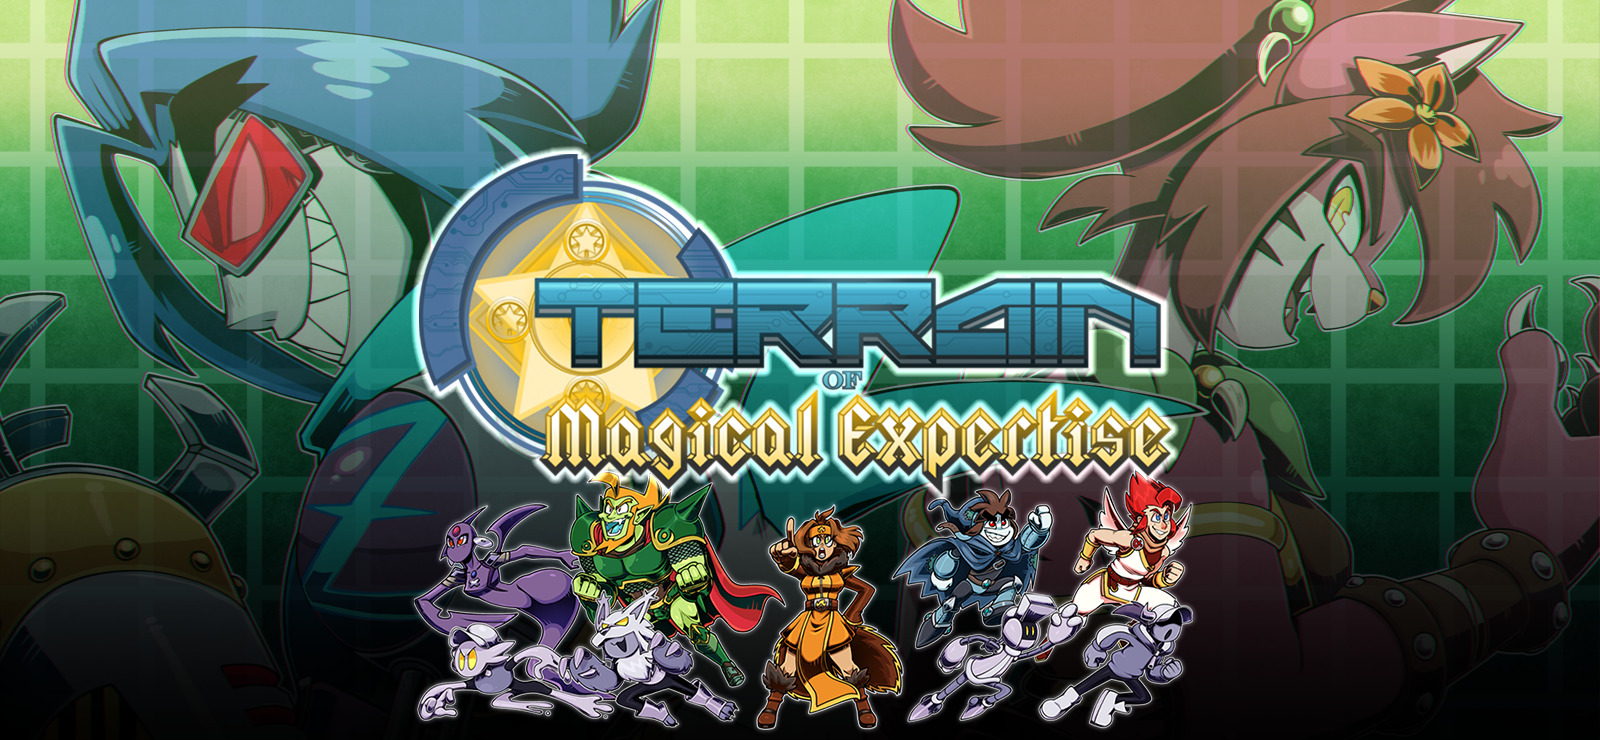 download Terrain of Magical Expertise